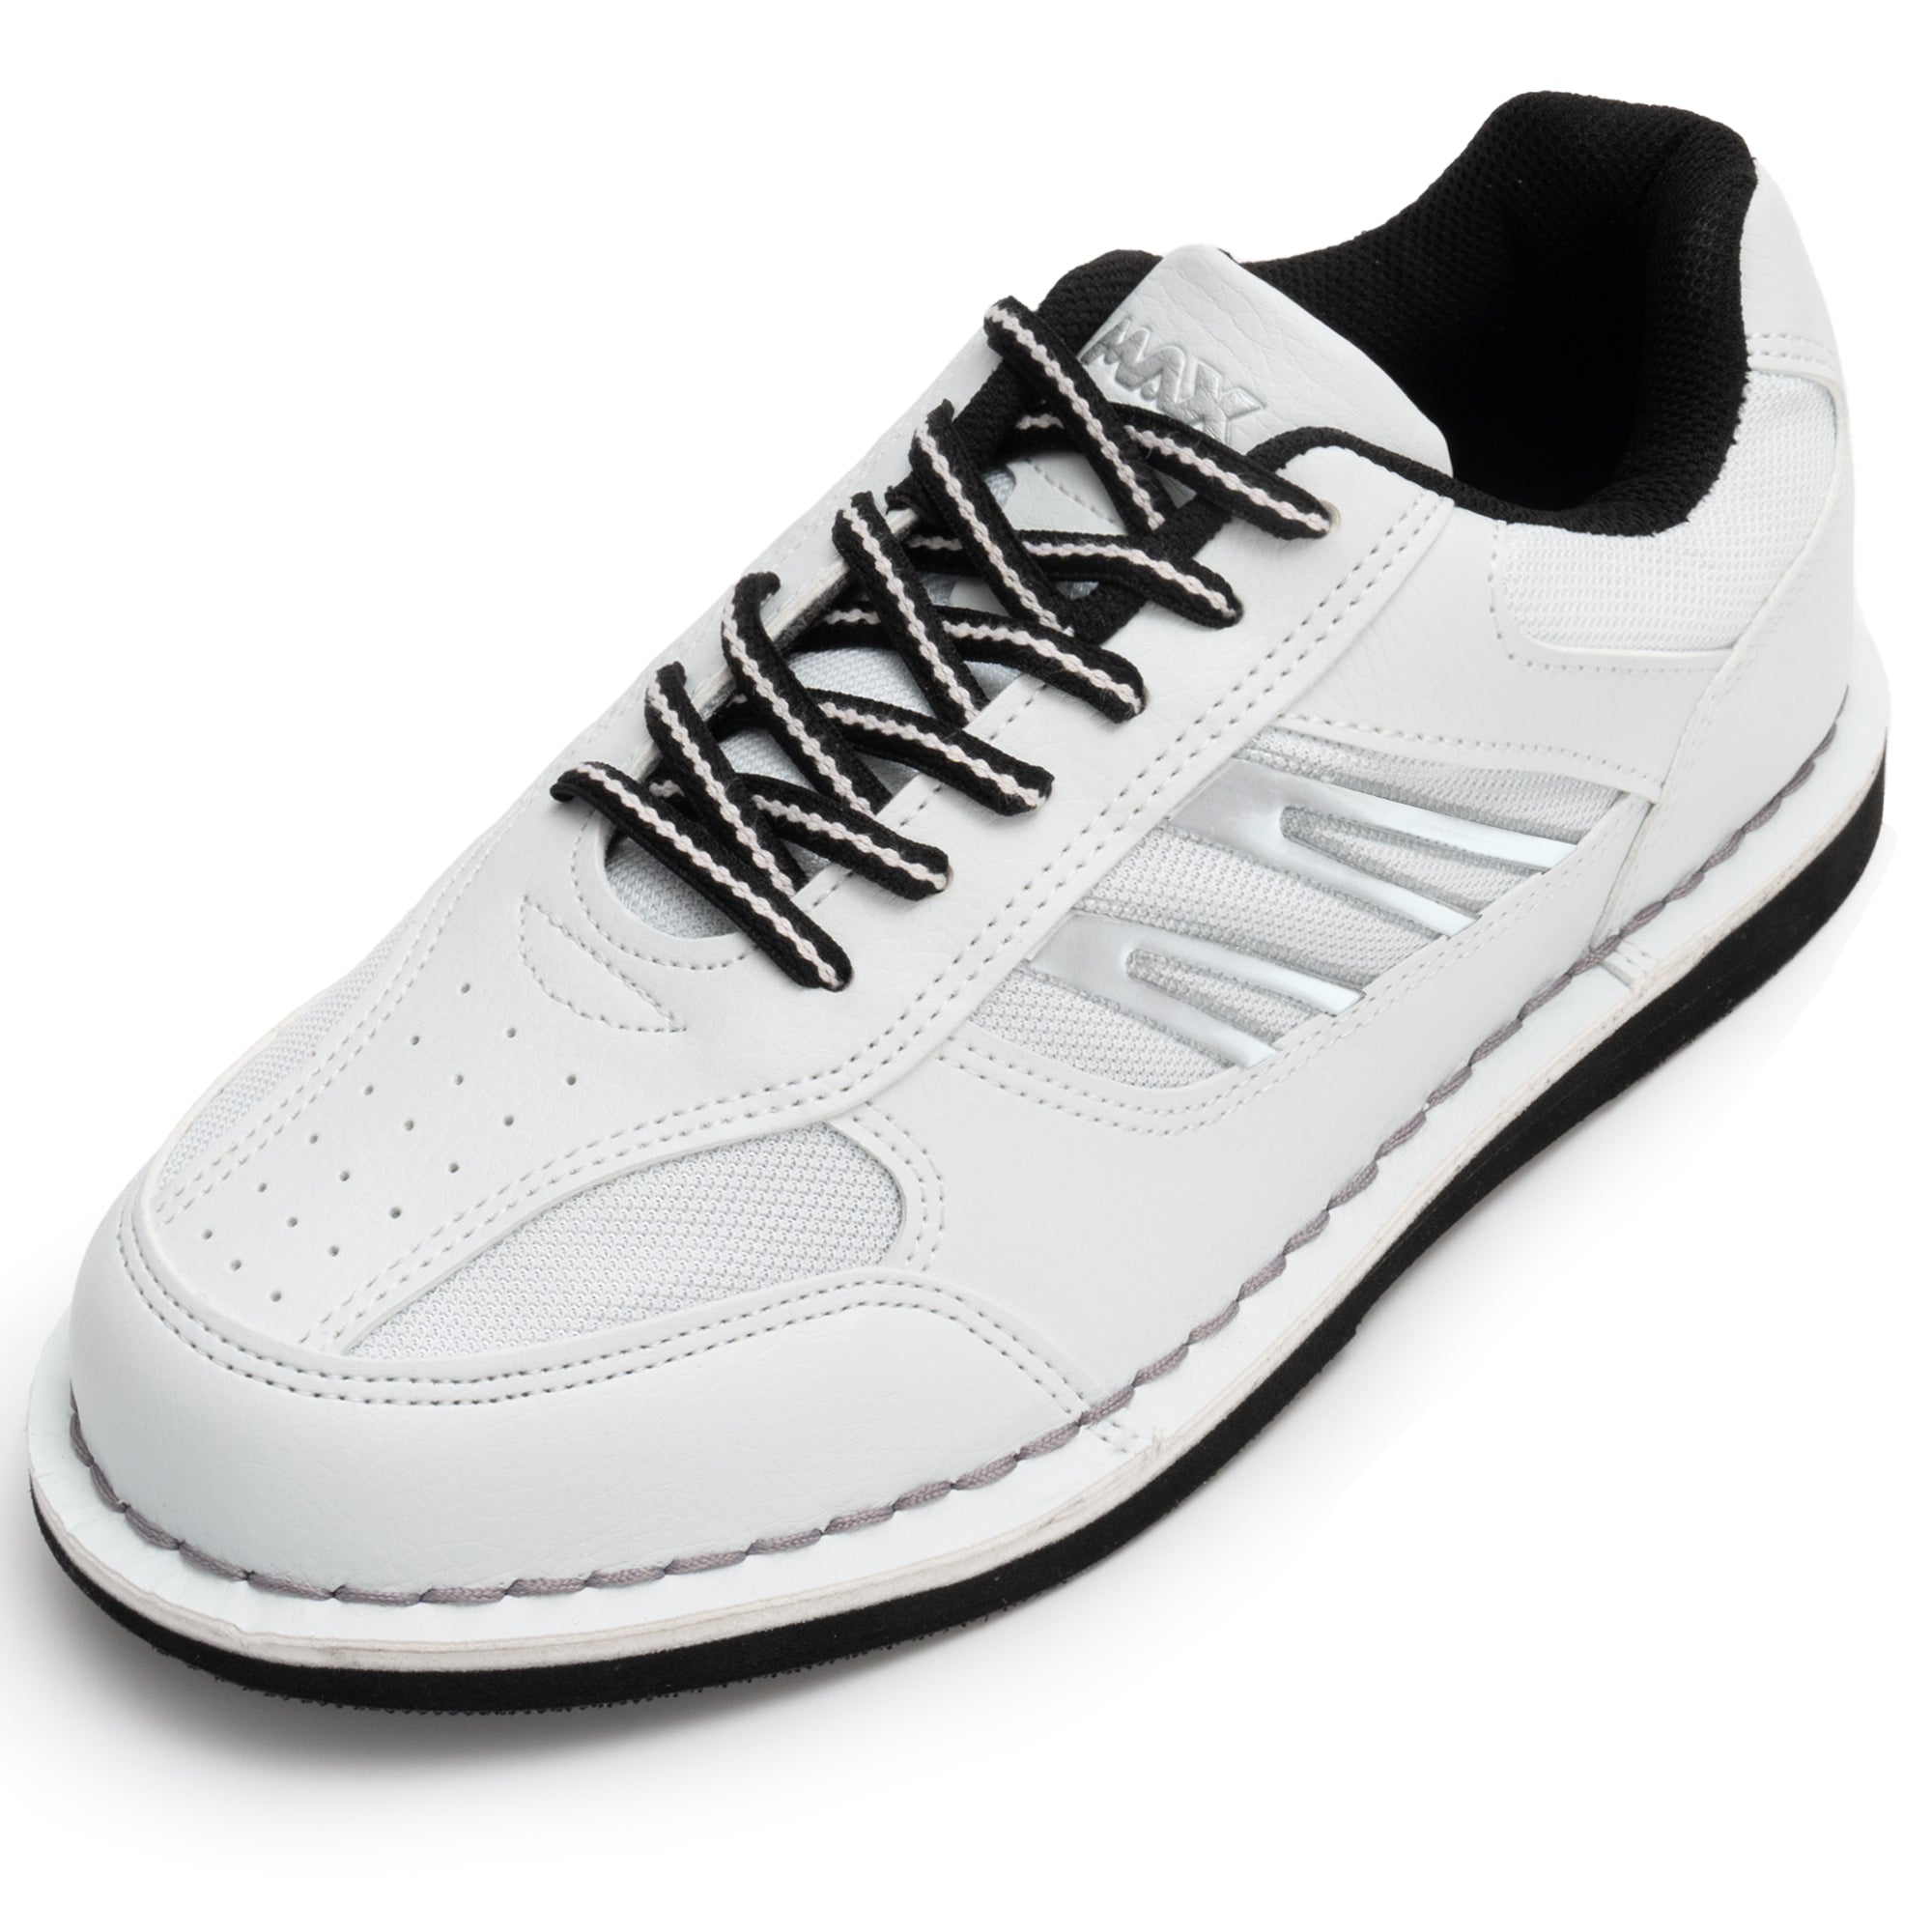 Maxwelter T-1 White Bowling Shoes Main